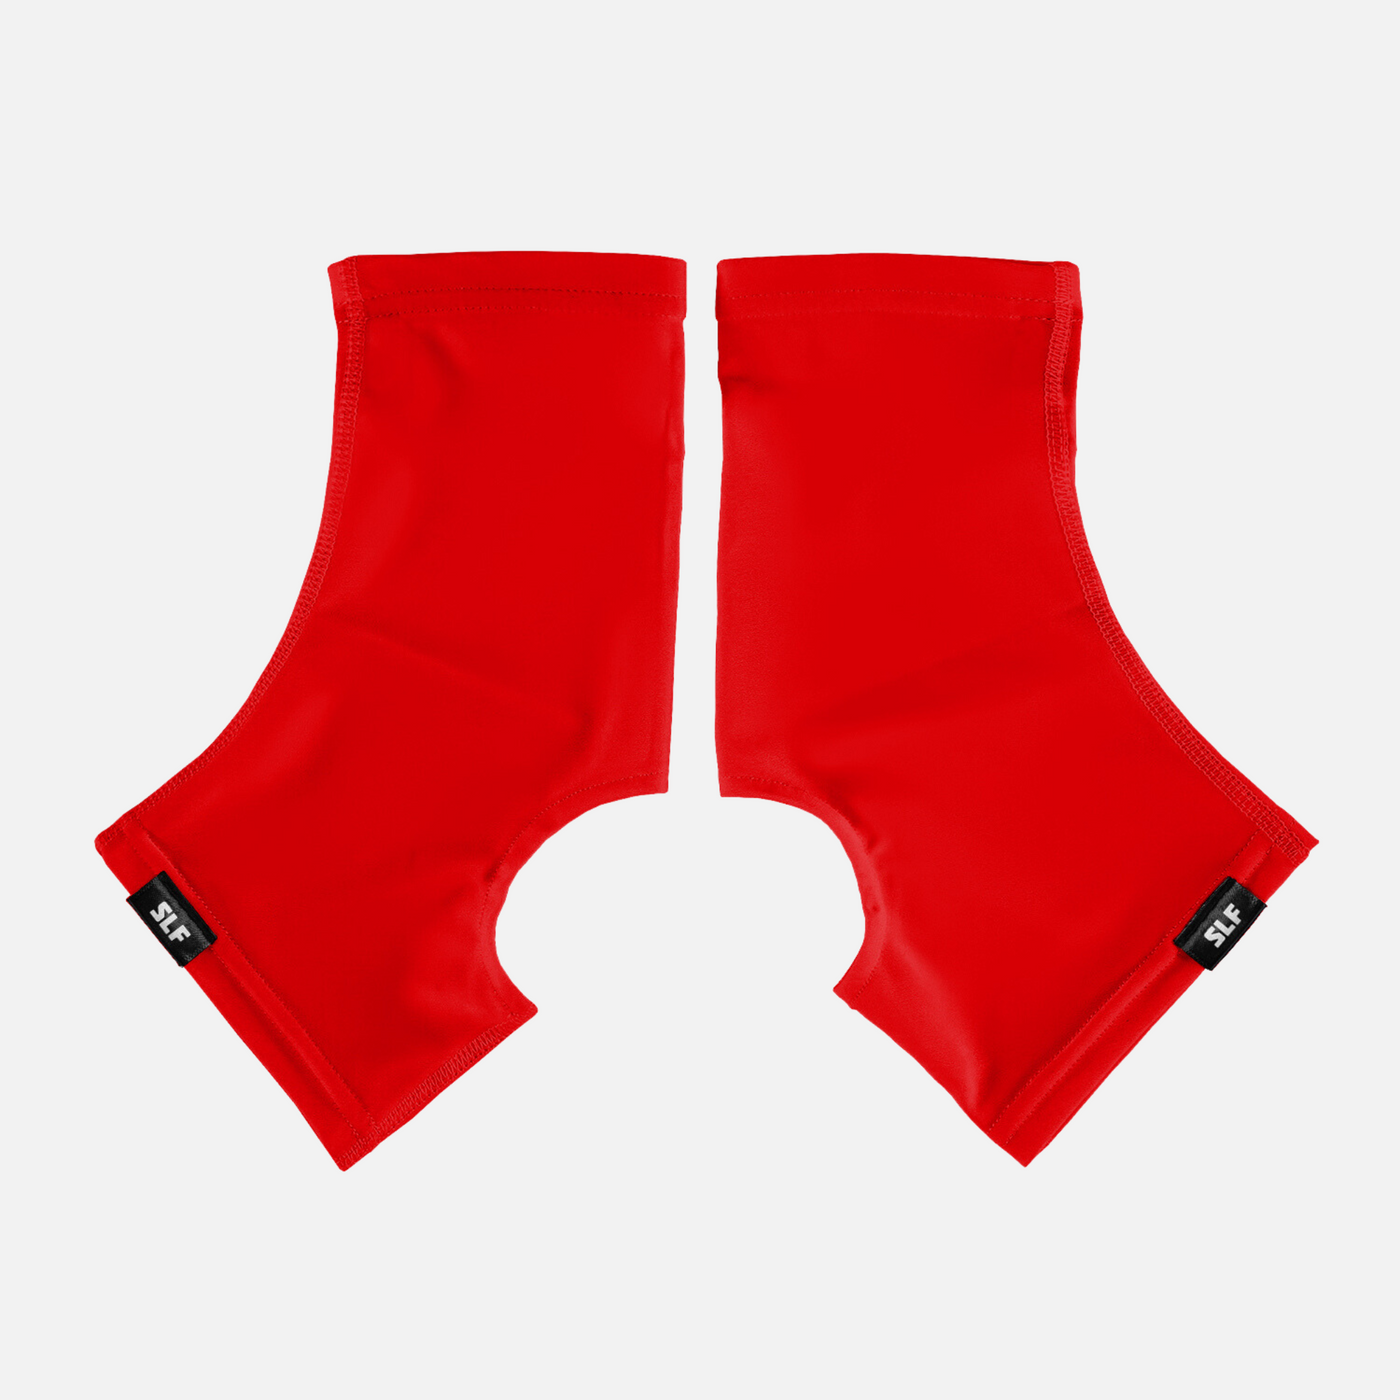 Hue Red Spats / Cleat Covers - Big